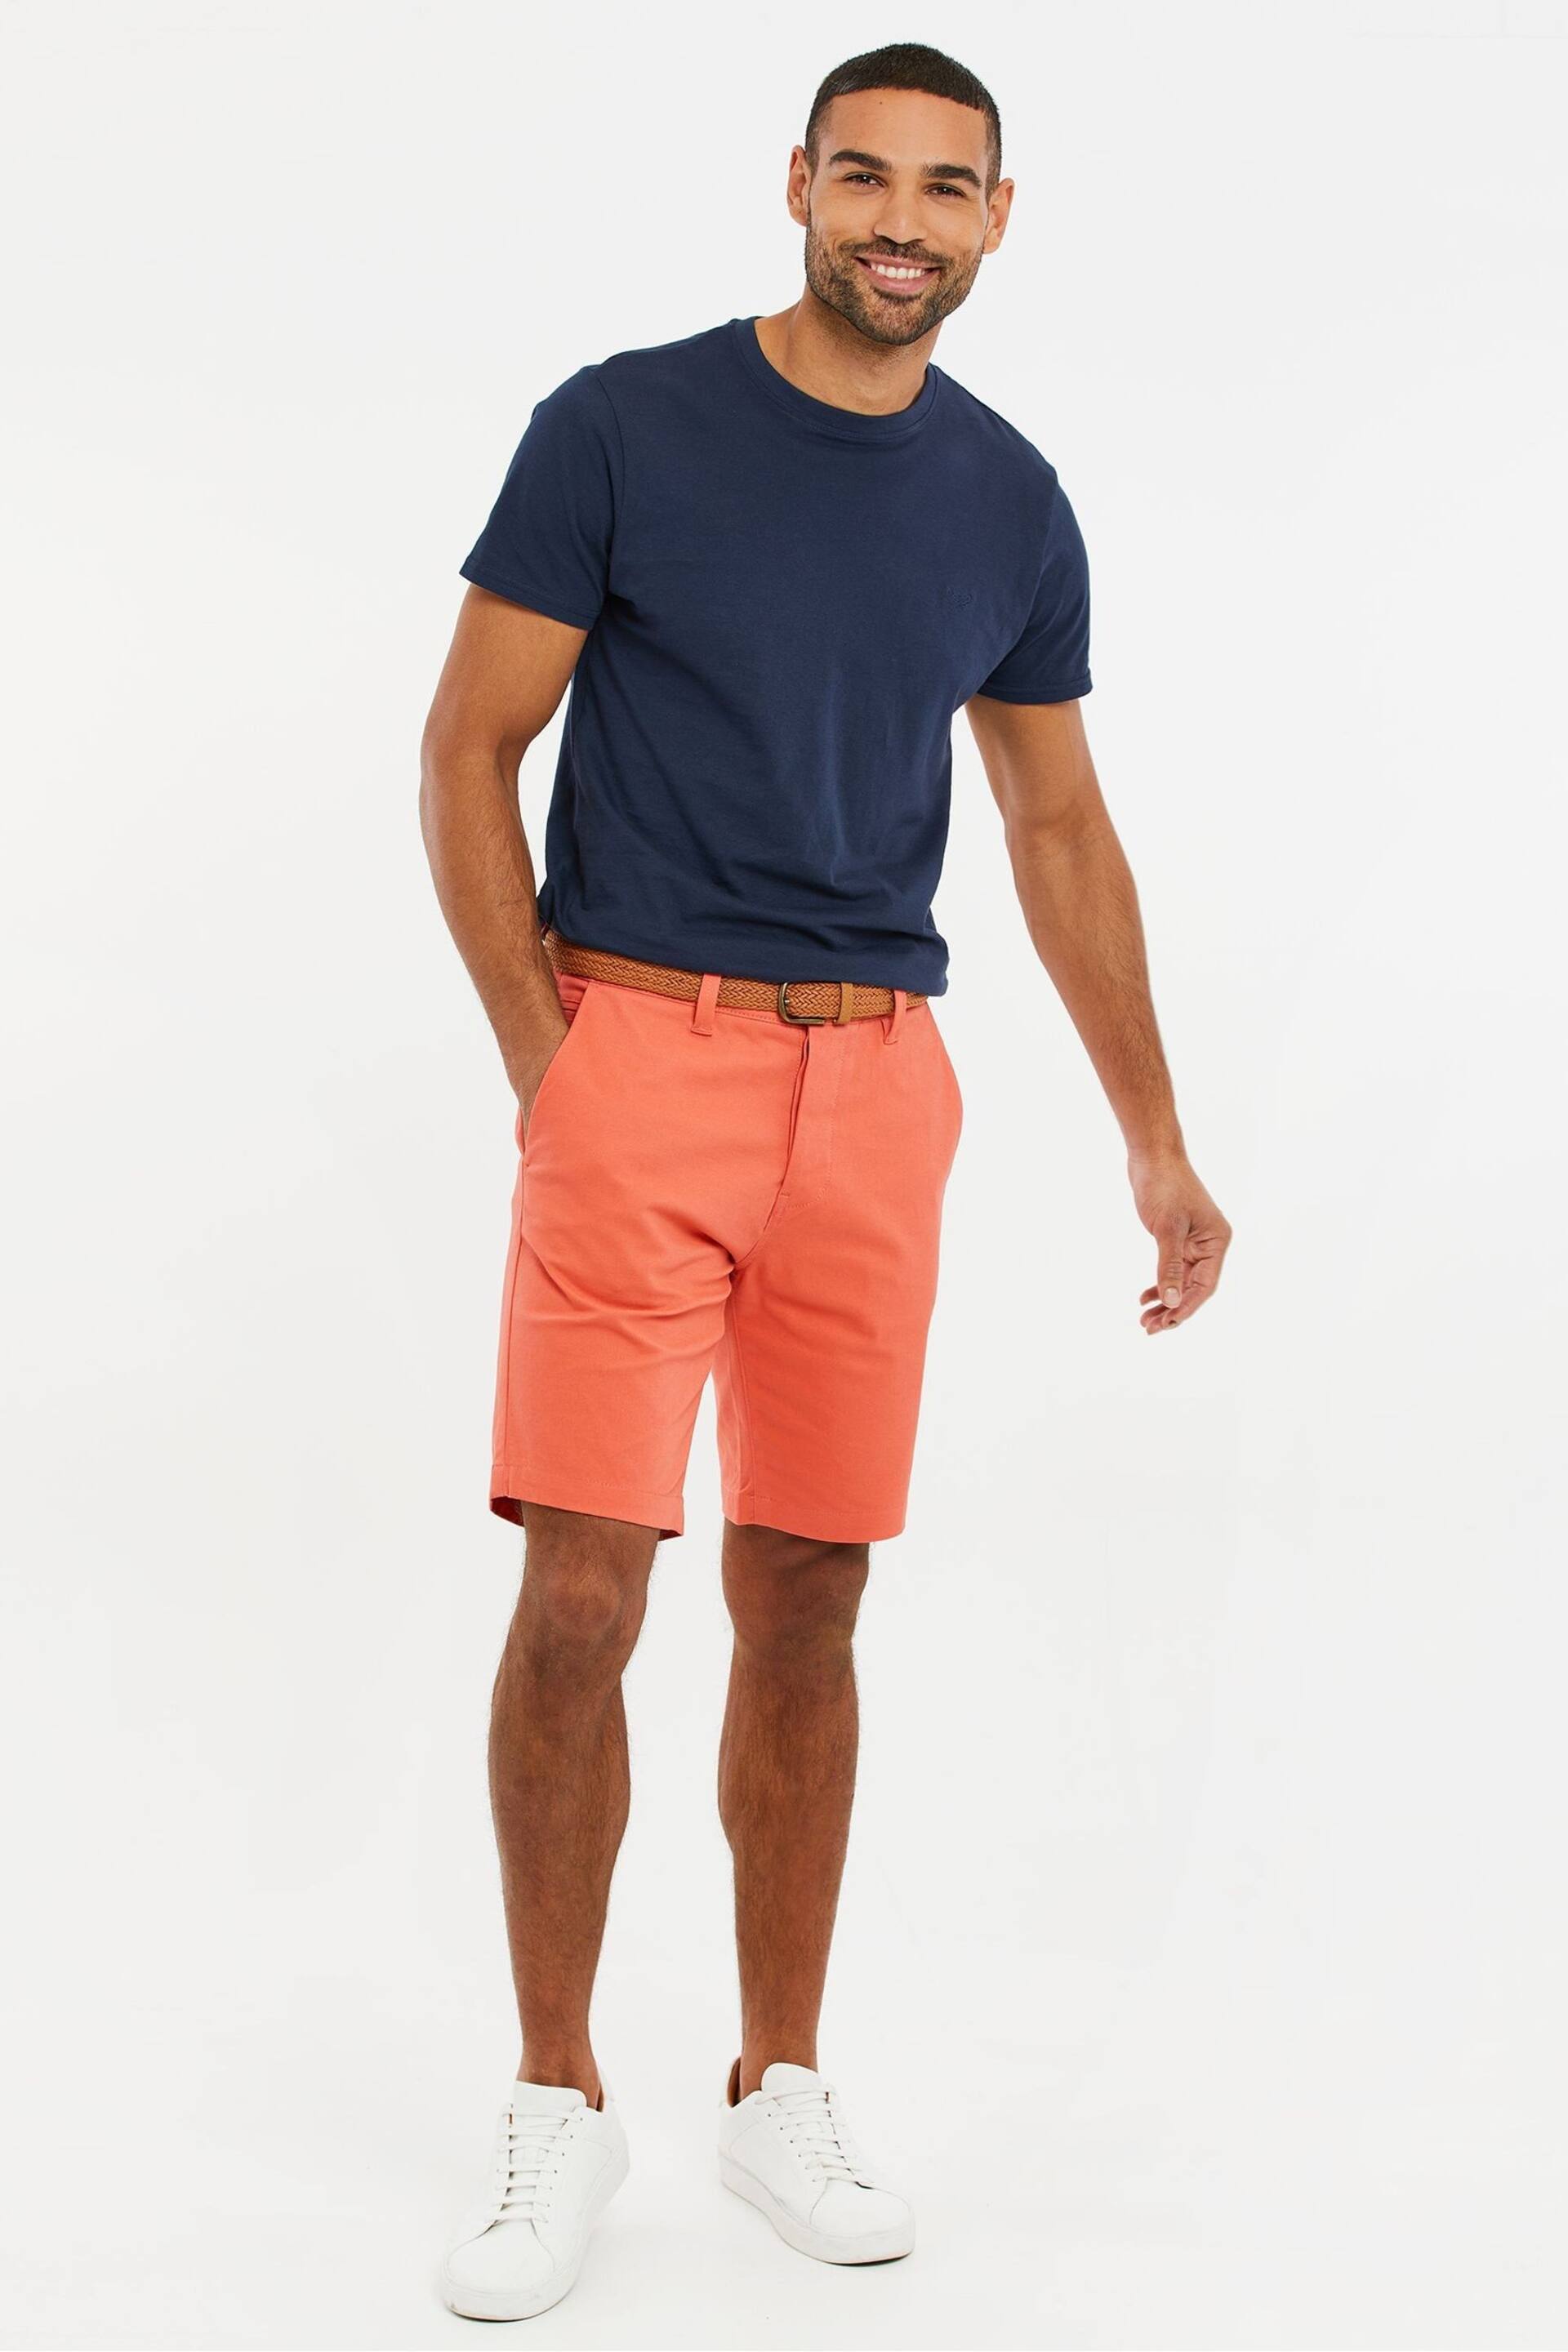 Threadbare Coral Pink Cotton Stretch Turn-Up Chino Shorts with Woven Belt - Image 1 of 4